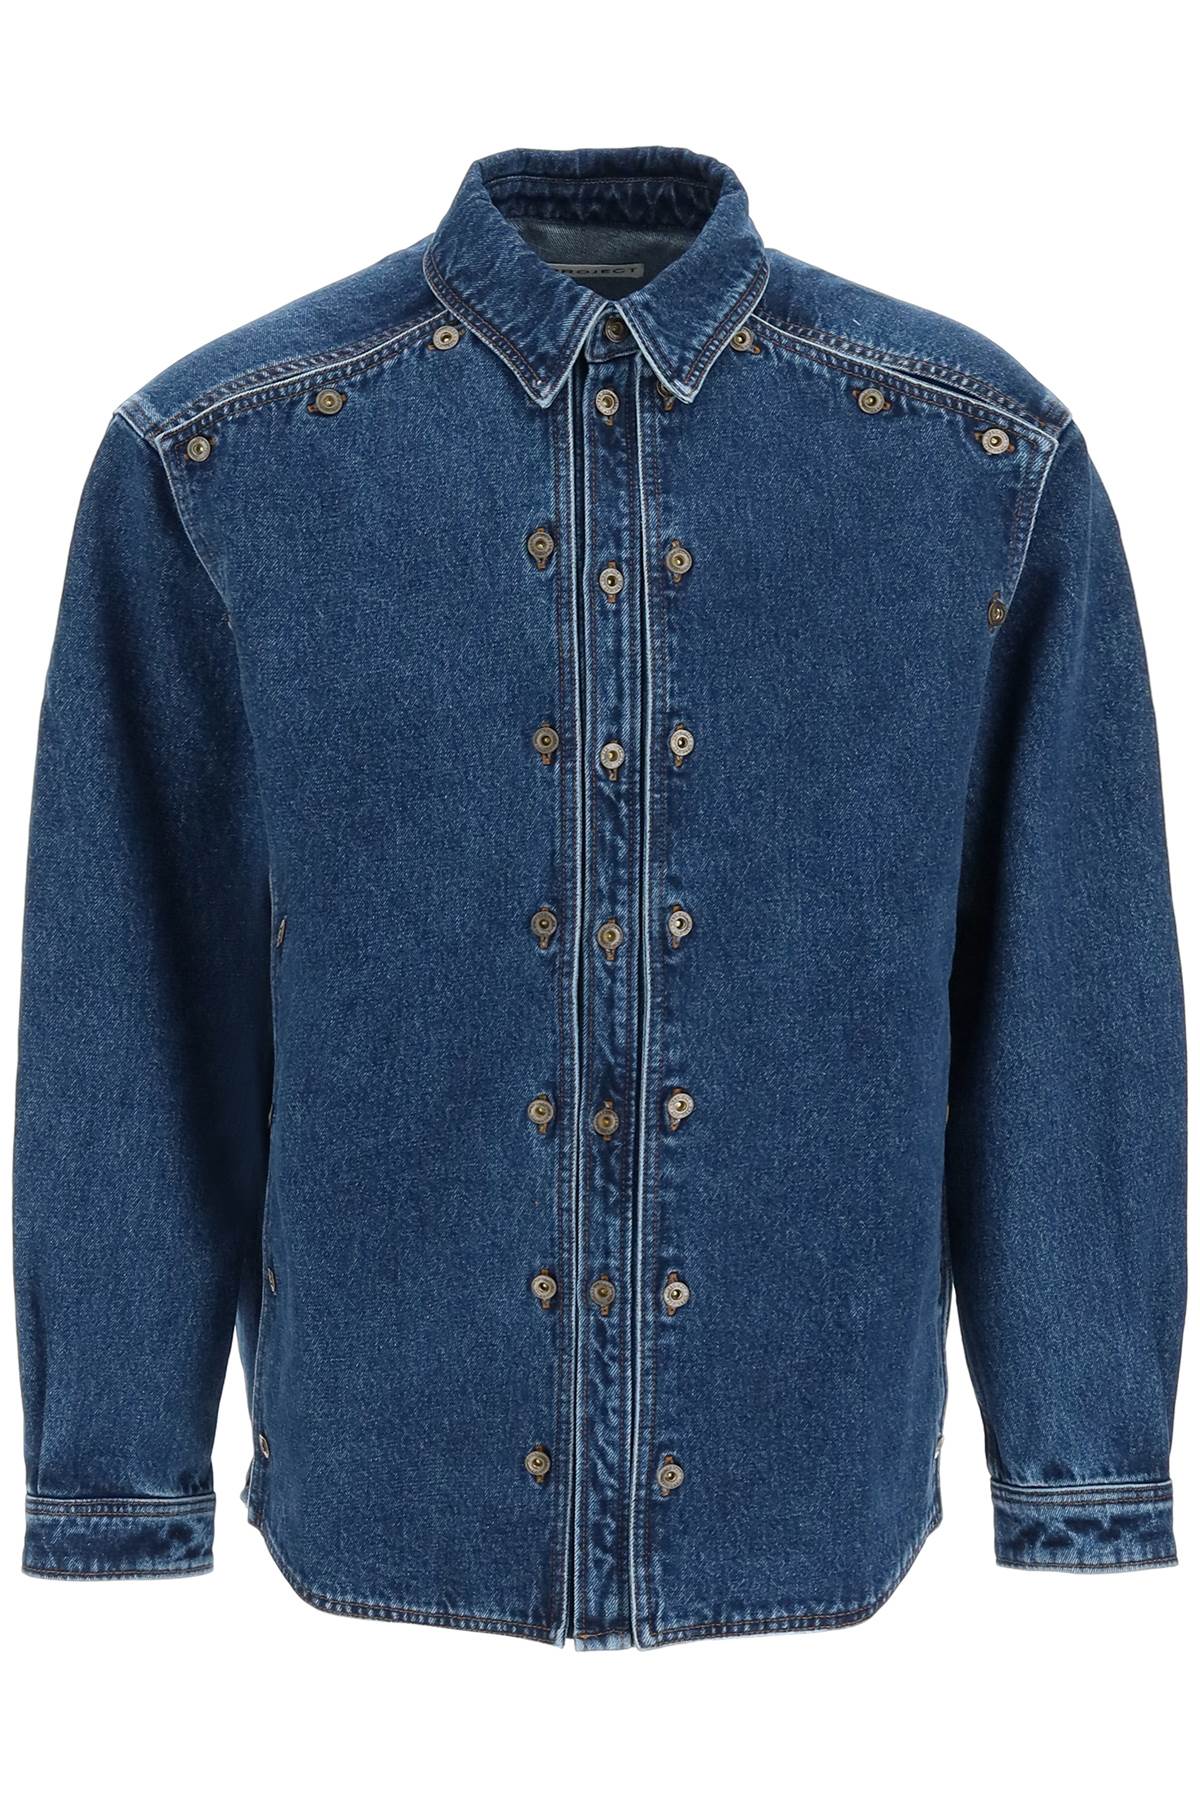 Y/PROJECT DENIM JACKET WITH OVERLYING PANELS